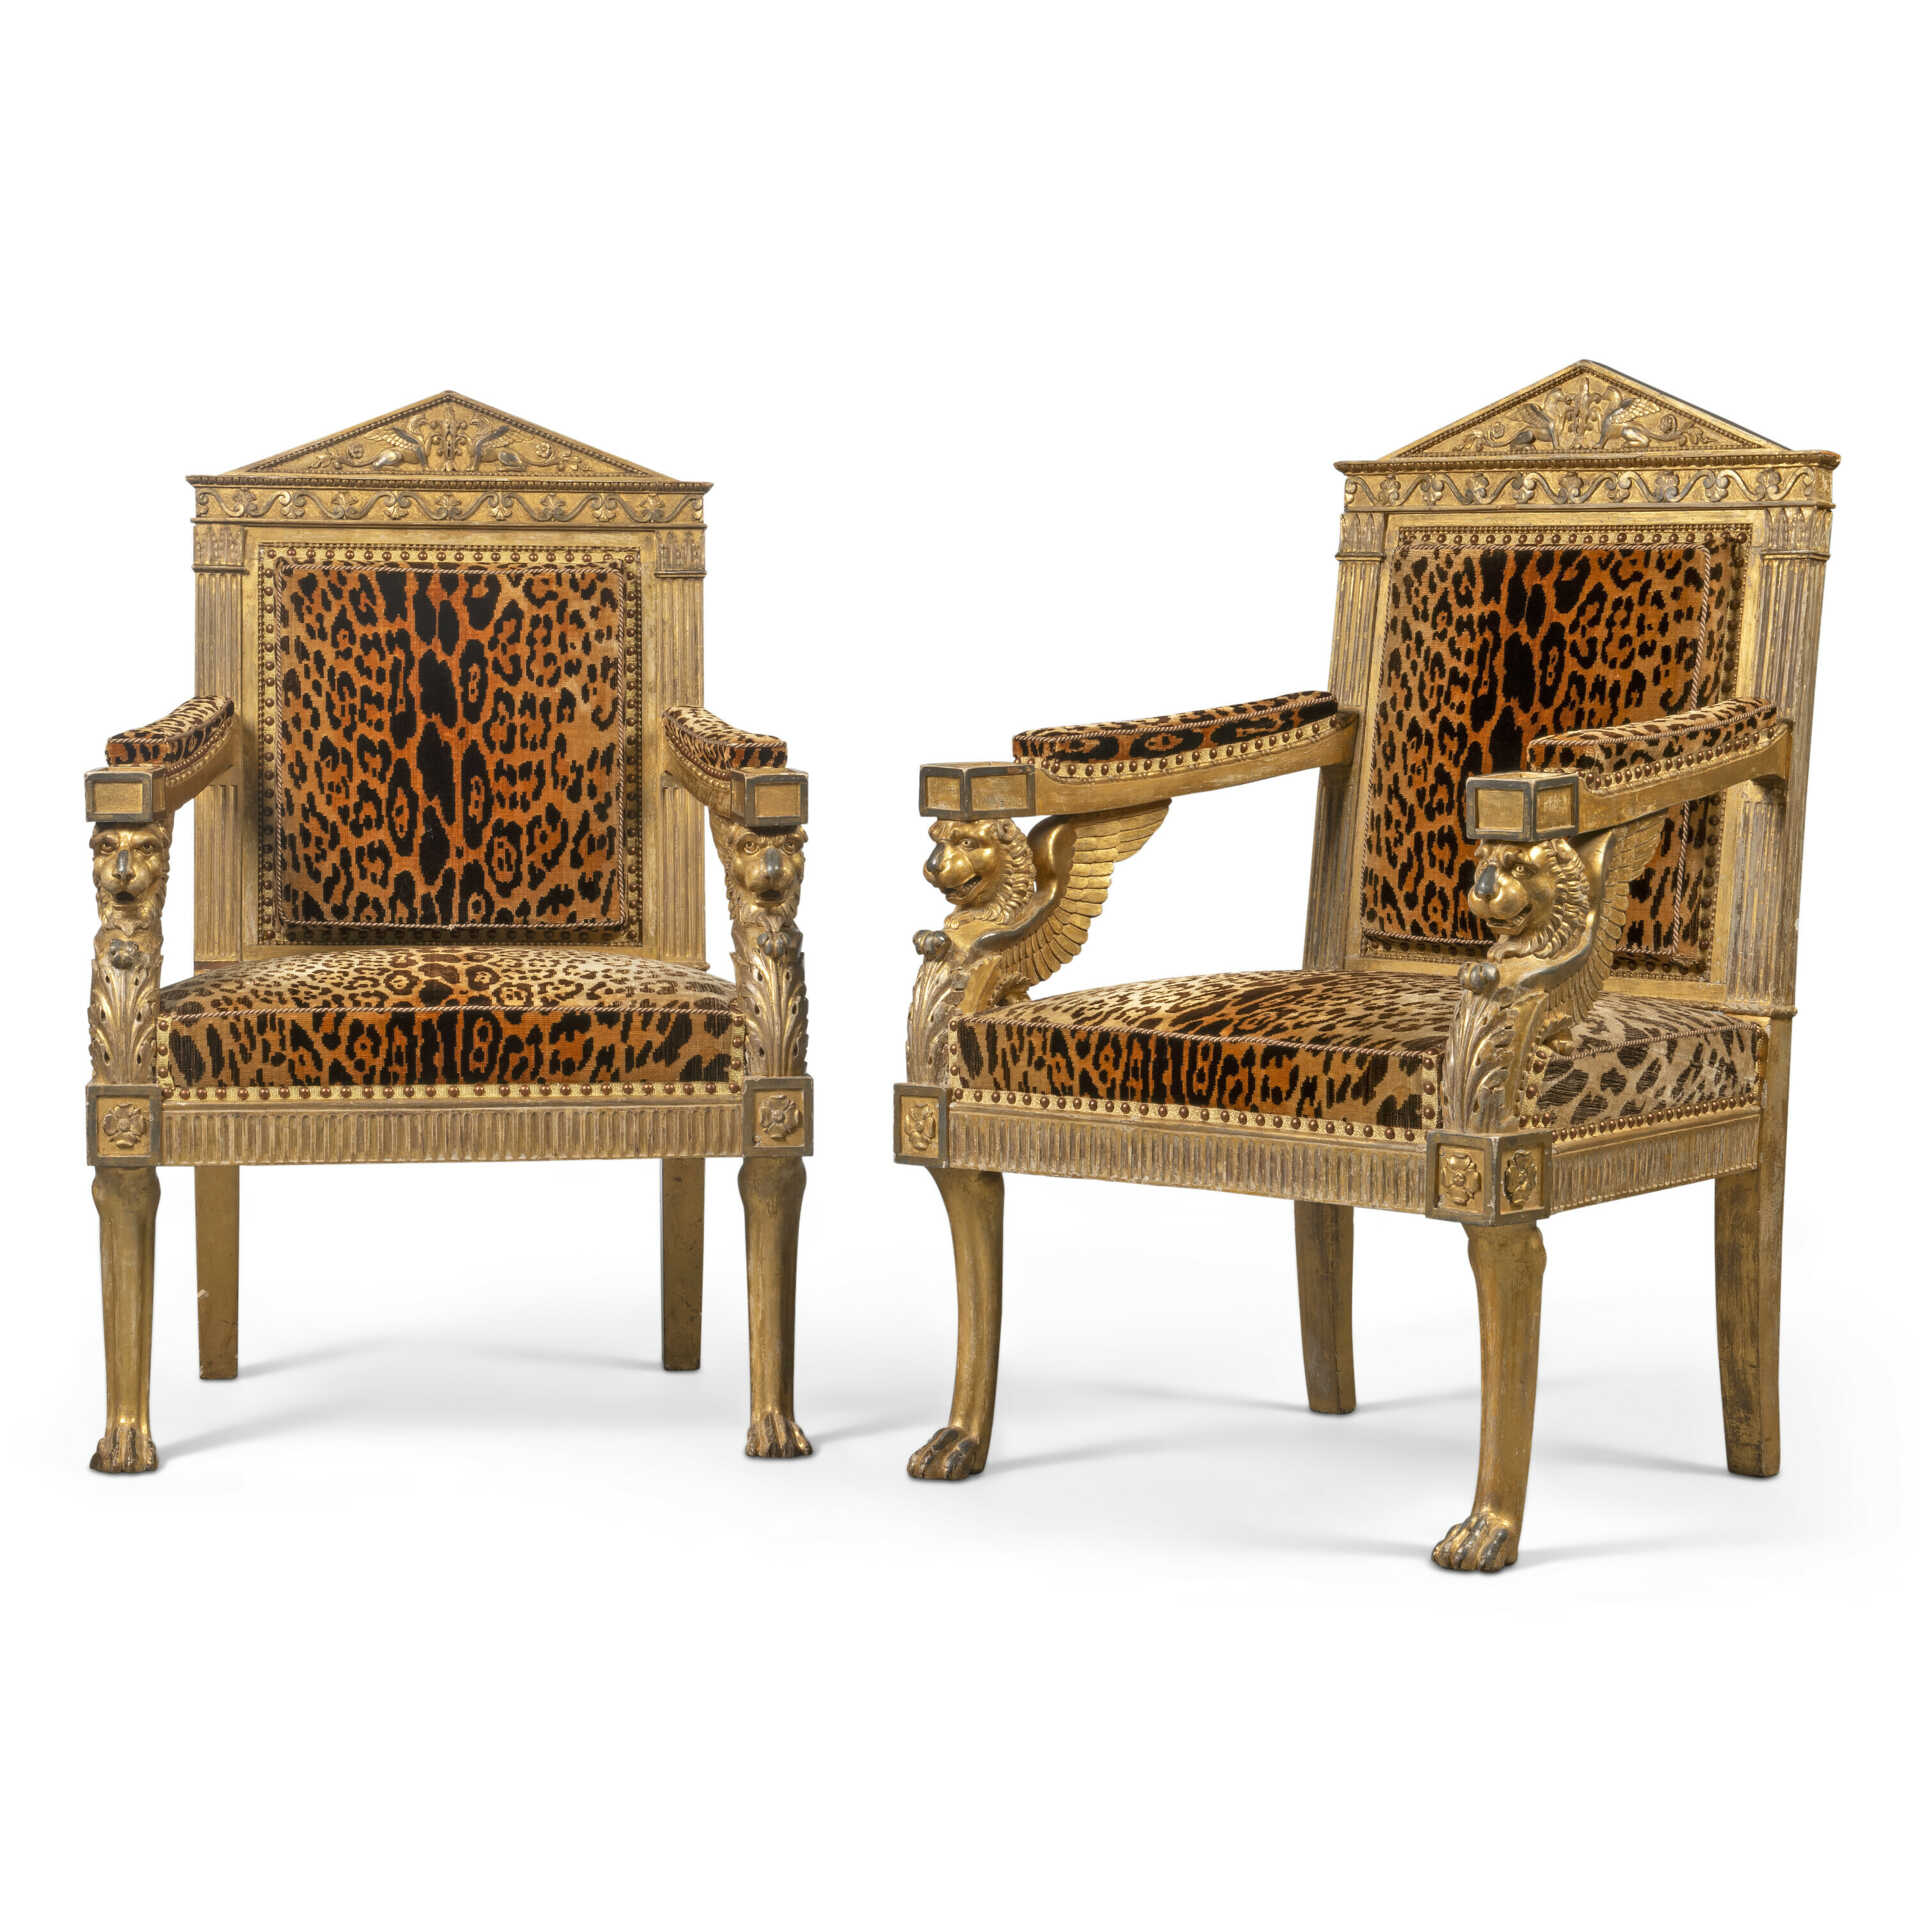 A PAIR OF ROMAN GILTWOOD ARMCHAIRS